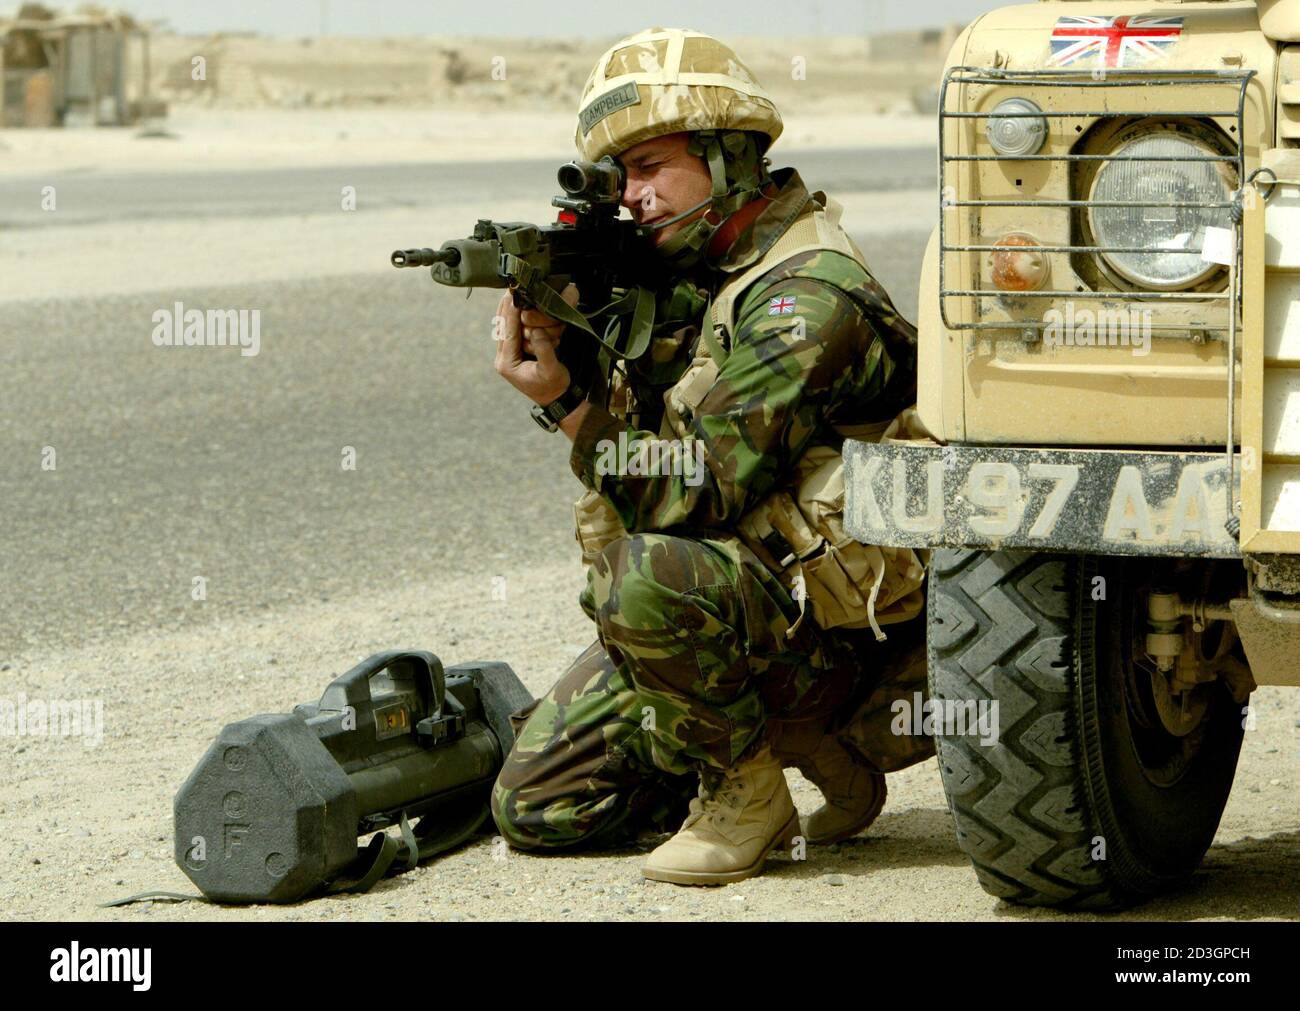 A soldier of the British 7th Armoured Brigade sits with a rocket launcher as he keeps watch on road leading to the southern Iraqi town of Basra March 22, 2003. The United States and Britain unleashed their first daylight air strikes on Baghdad on Saturday after pounding it with a fearsome night blitz. After the bombing rose to a new intensity in the Iraqi capital, U.S. forces said they had captured a vital crossing point over the Euphrates river, and were battling towards Iraq's second city of Basra in the south. REUTERS/Jerry Lampen  JFL/ Stock Photo